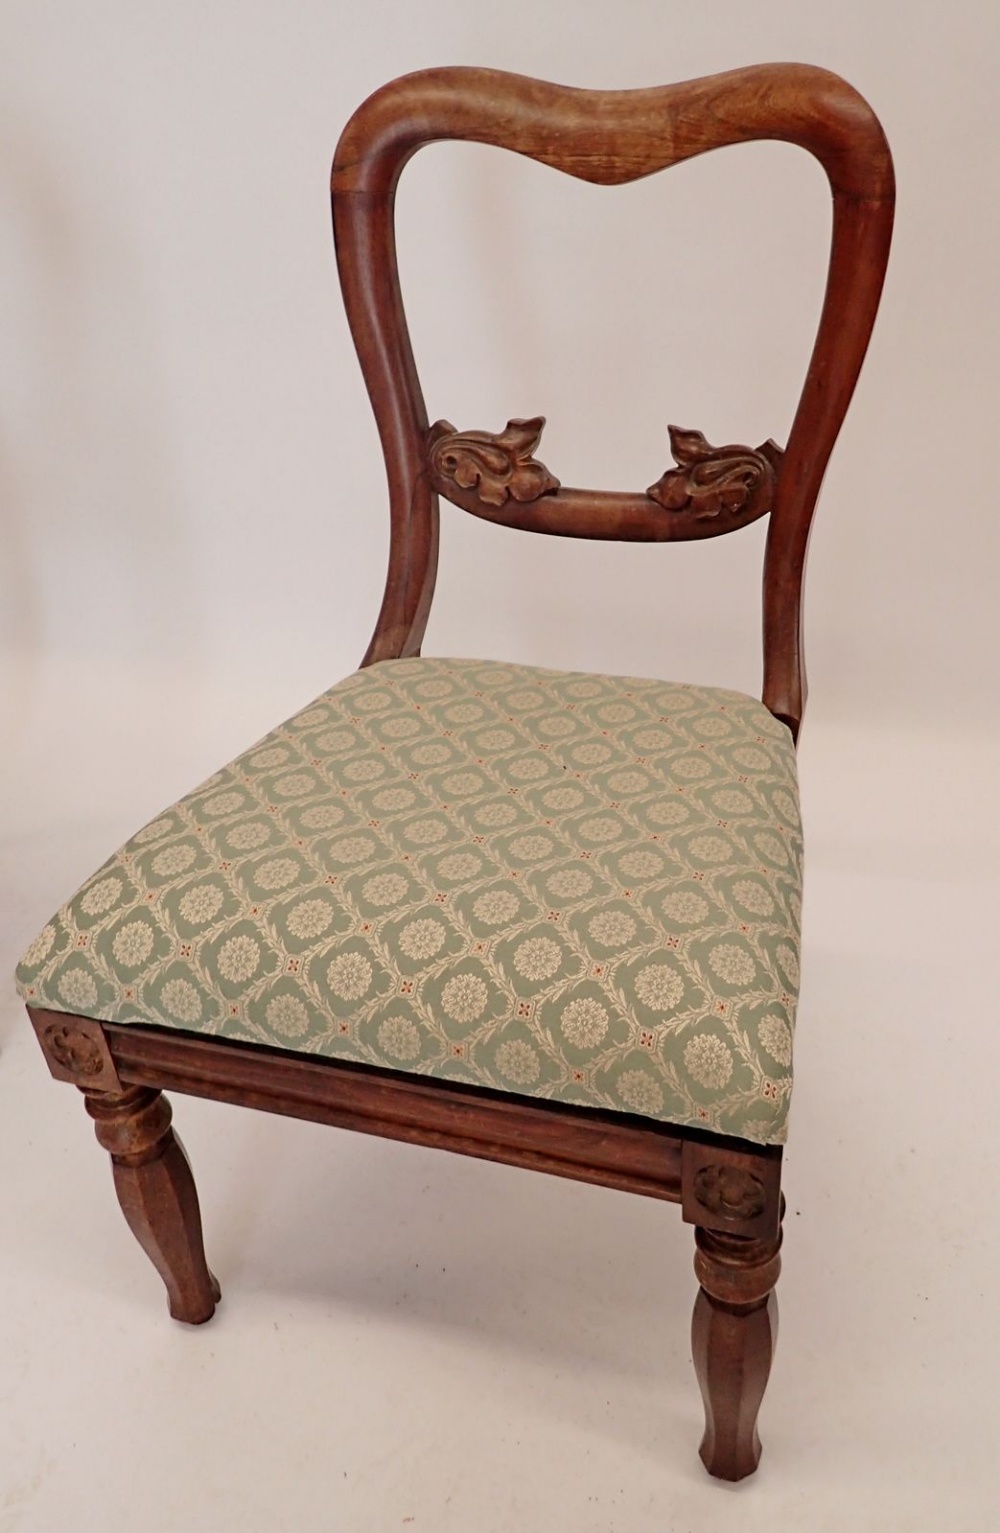 An Edwardian corner chair and a Victorian chair - Image 2 of 2